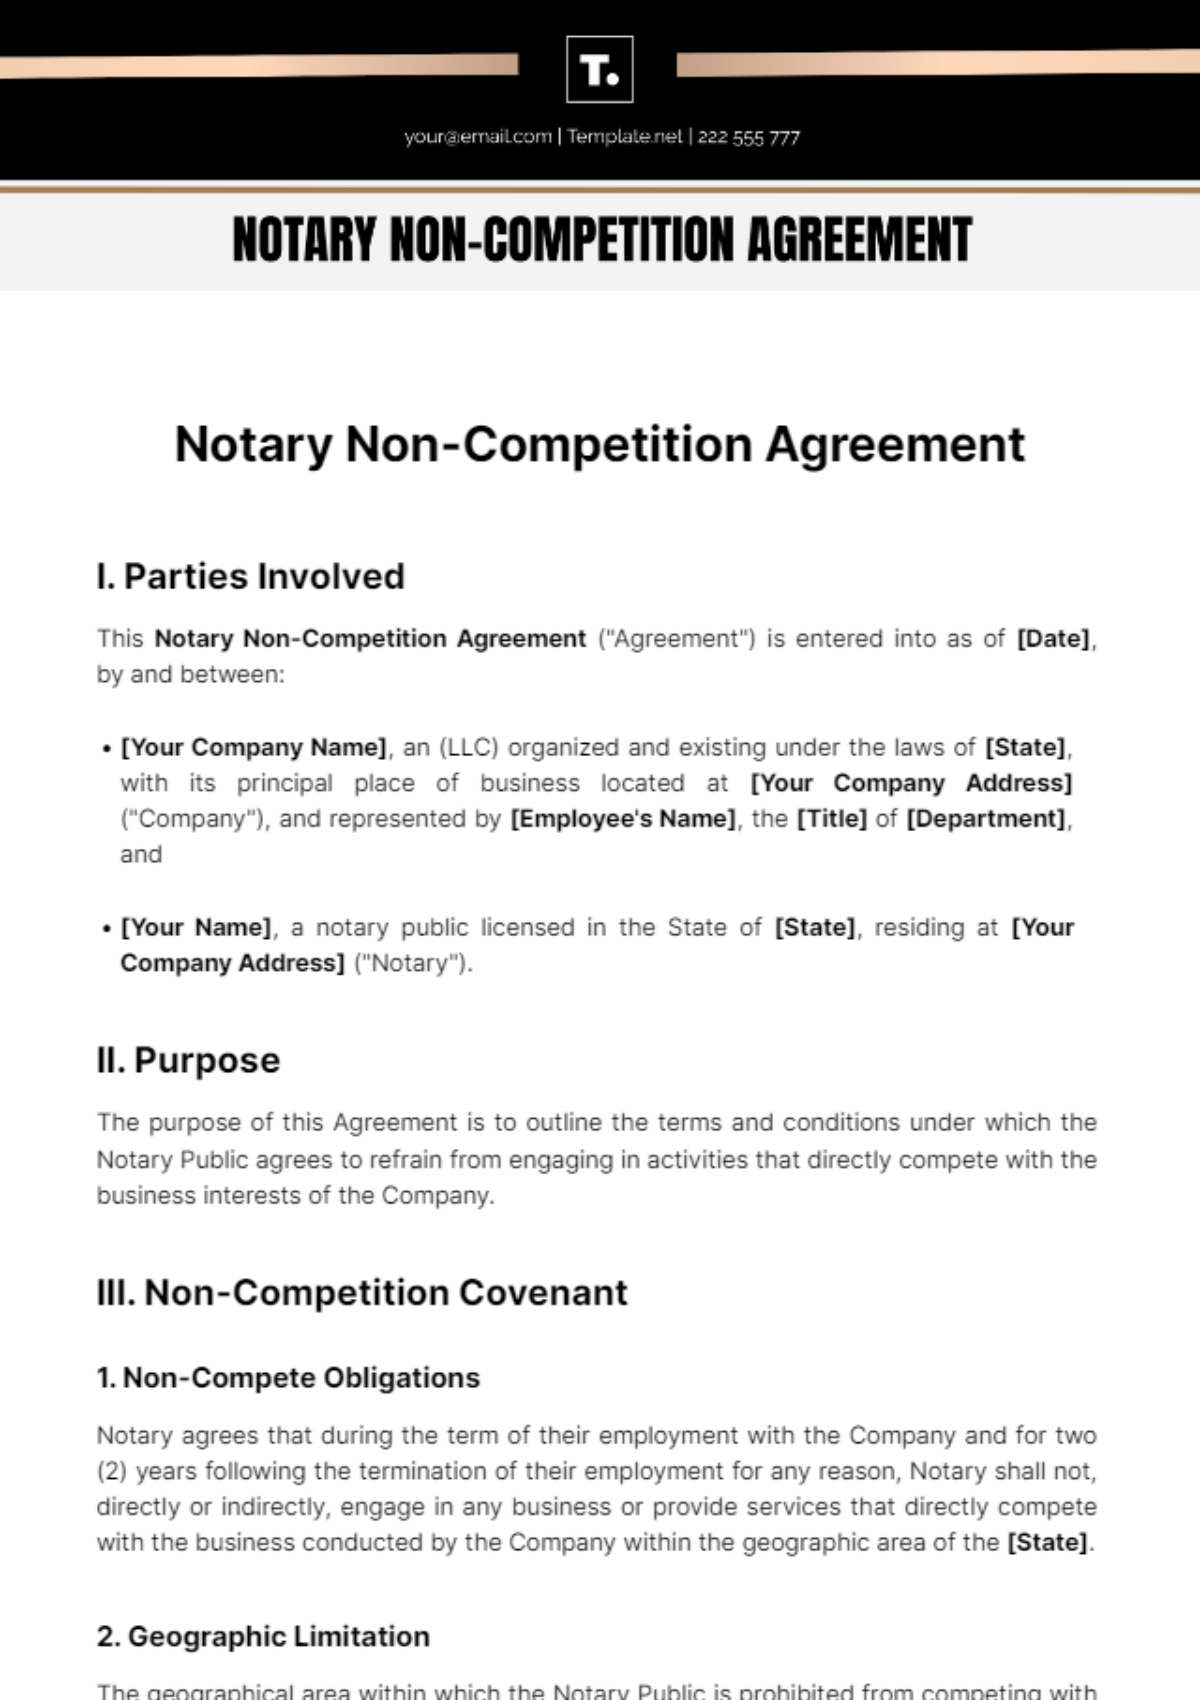 Free Notary Non-Competition Agreement Template